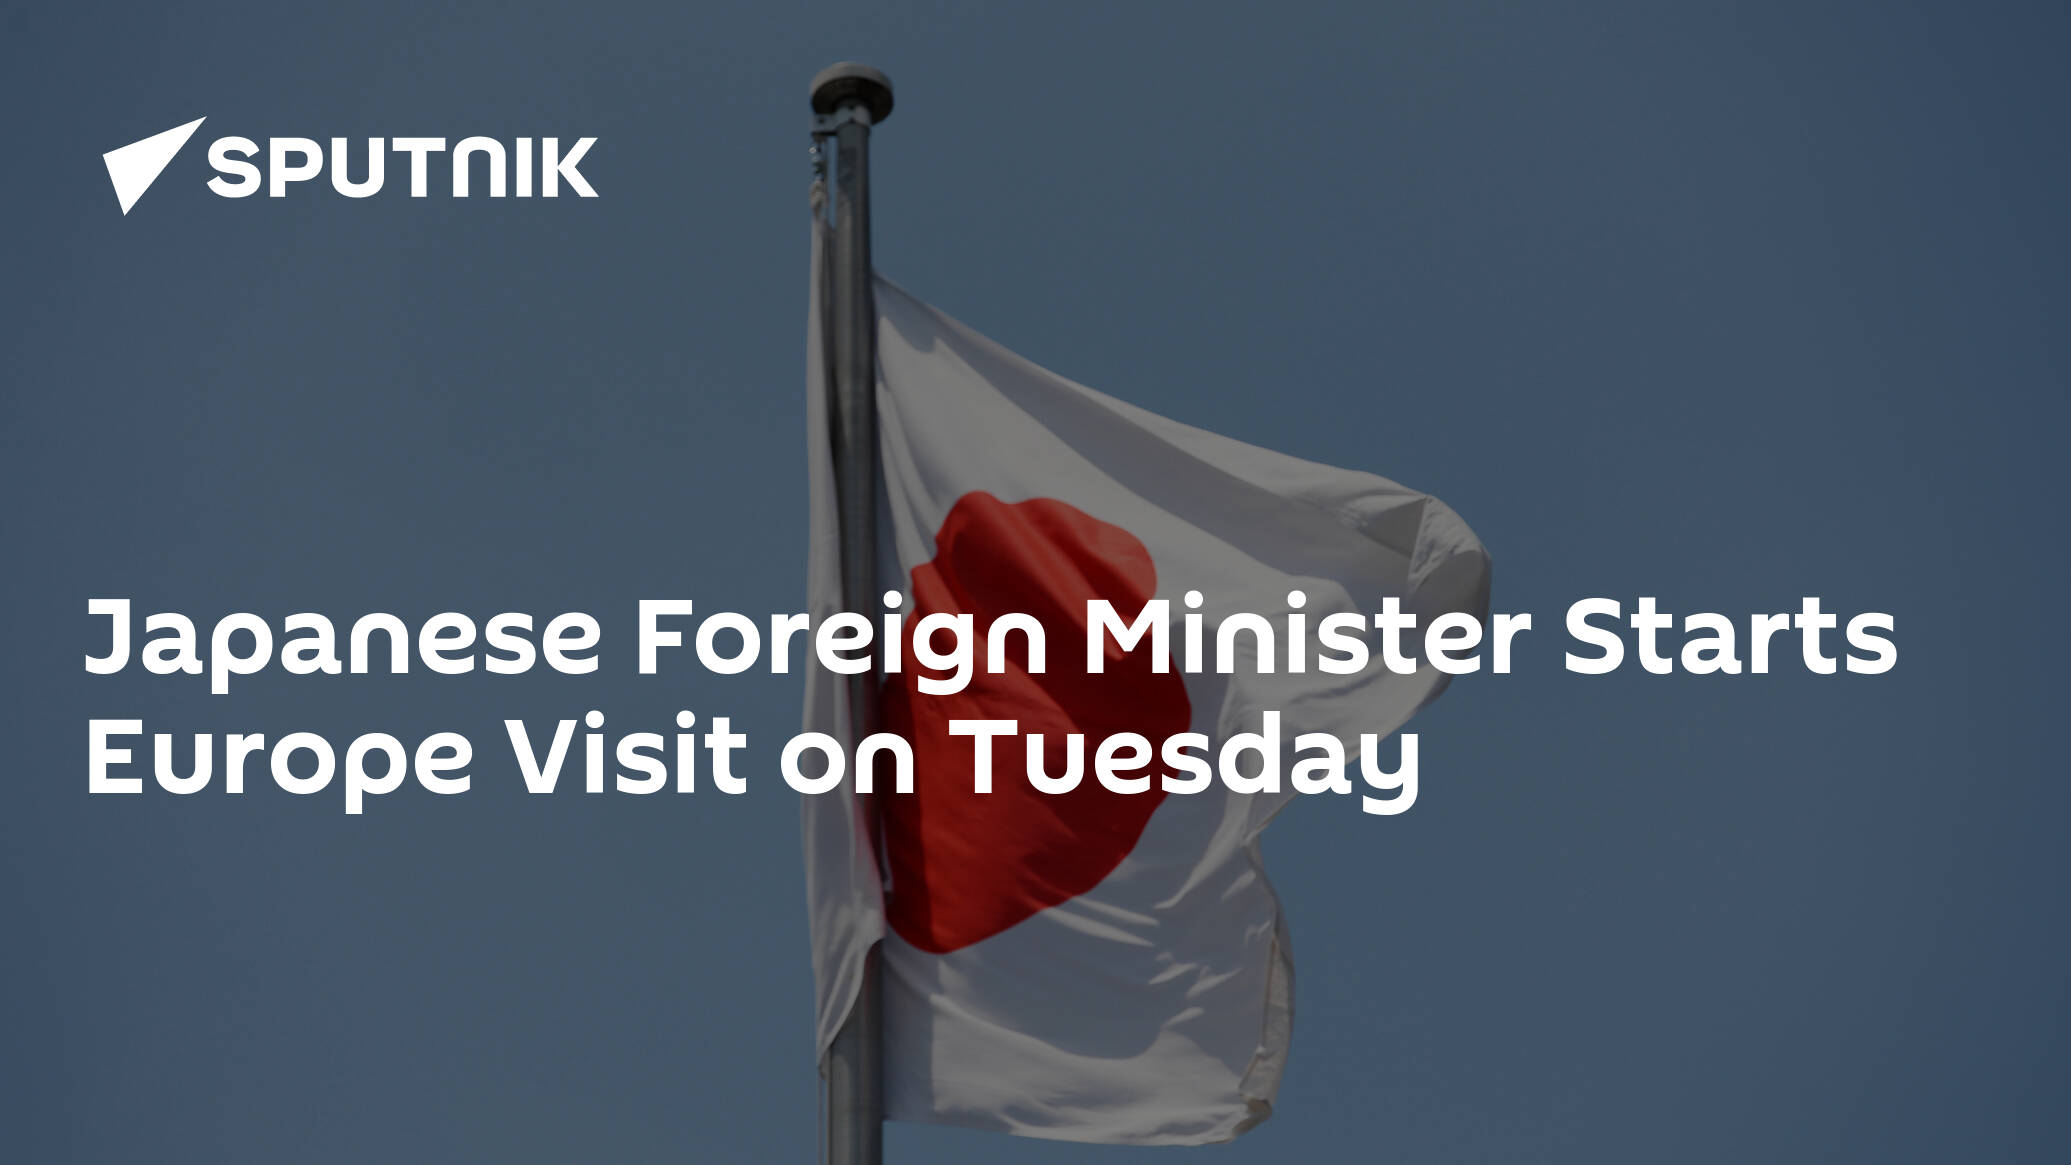 Japanese Foreign Minister Starts Europe Visit on Tuesday